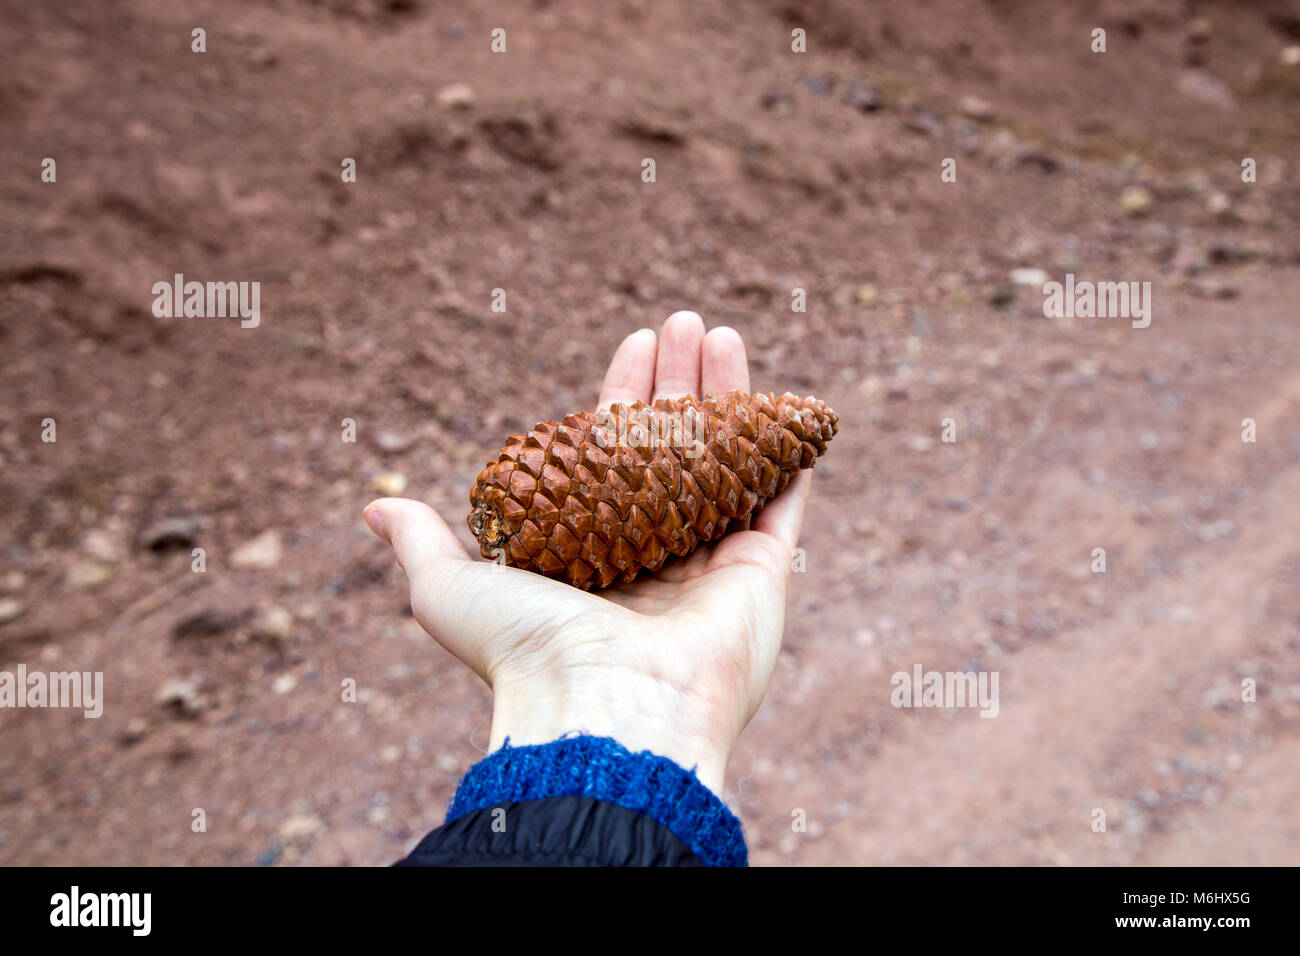 Hand holding pine cone with a barren ground background, Atlas Mountains, Morocco Stock Photo